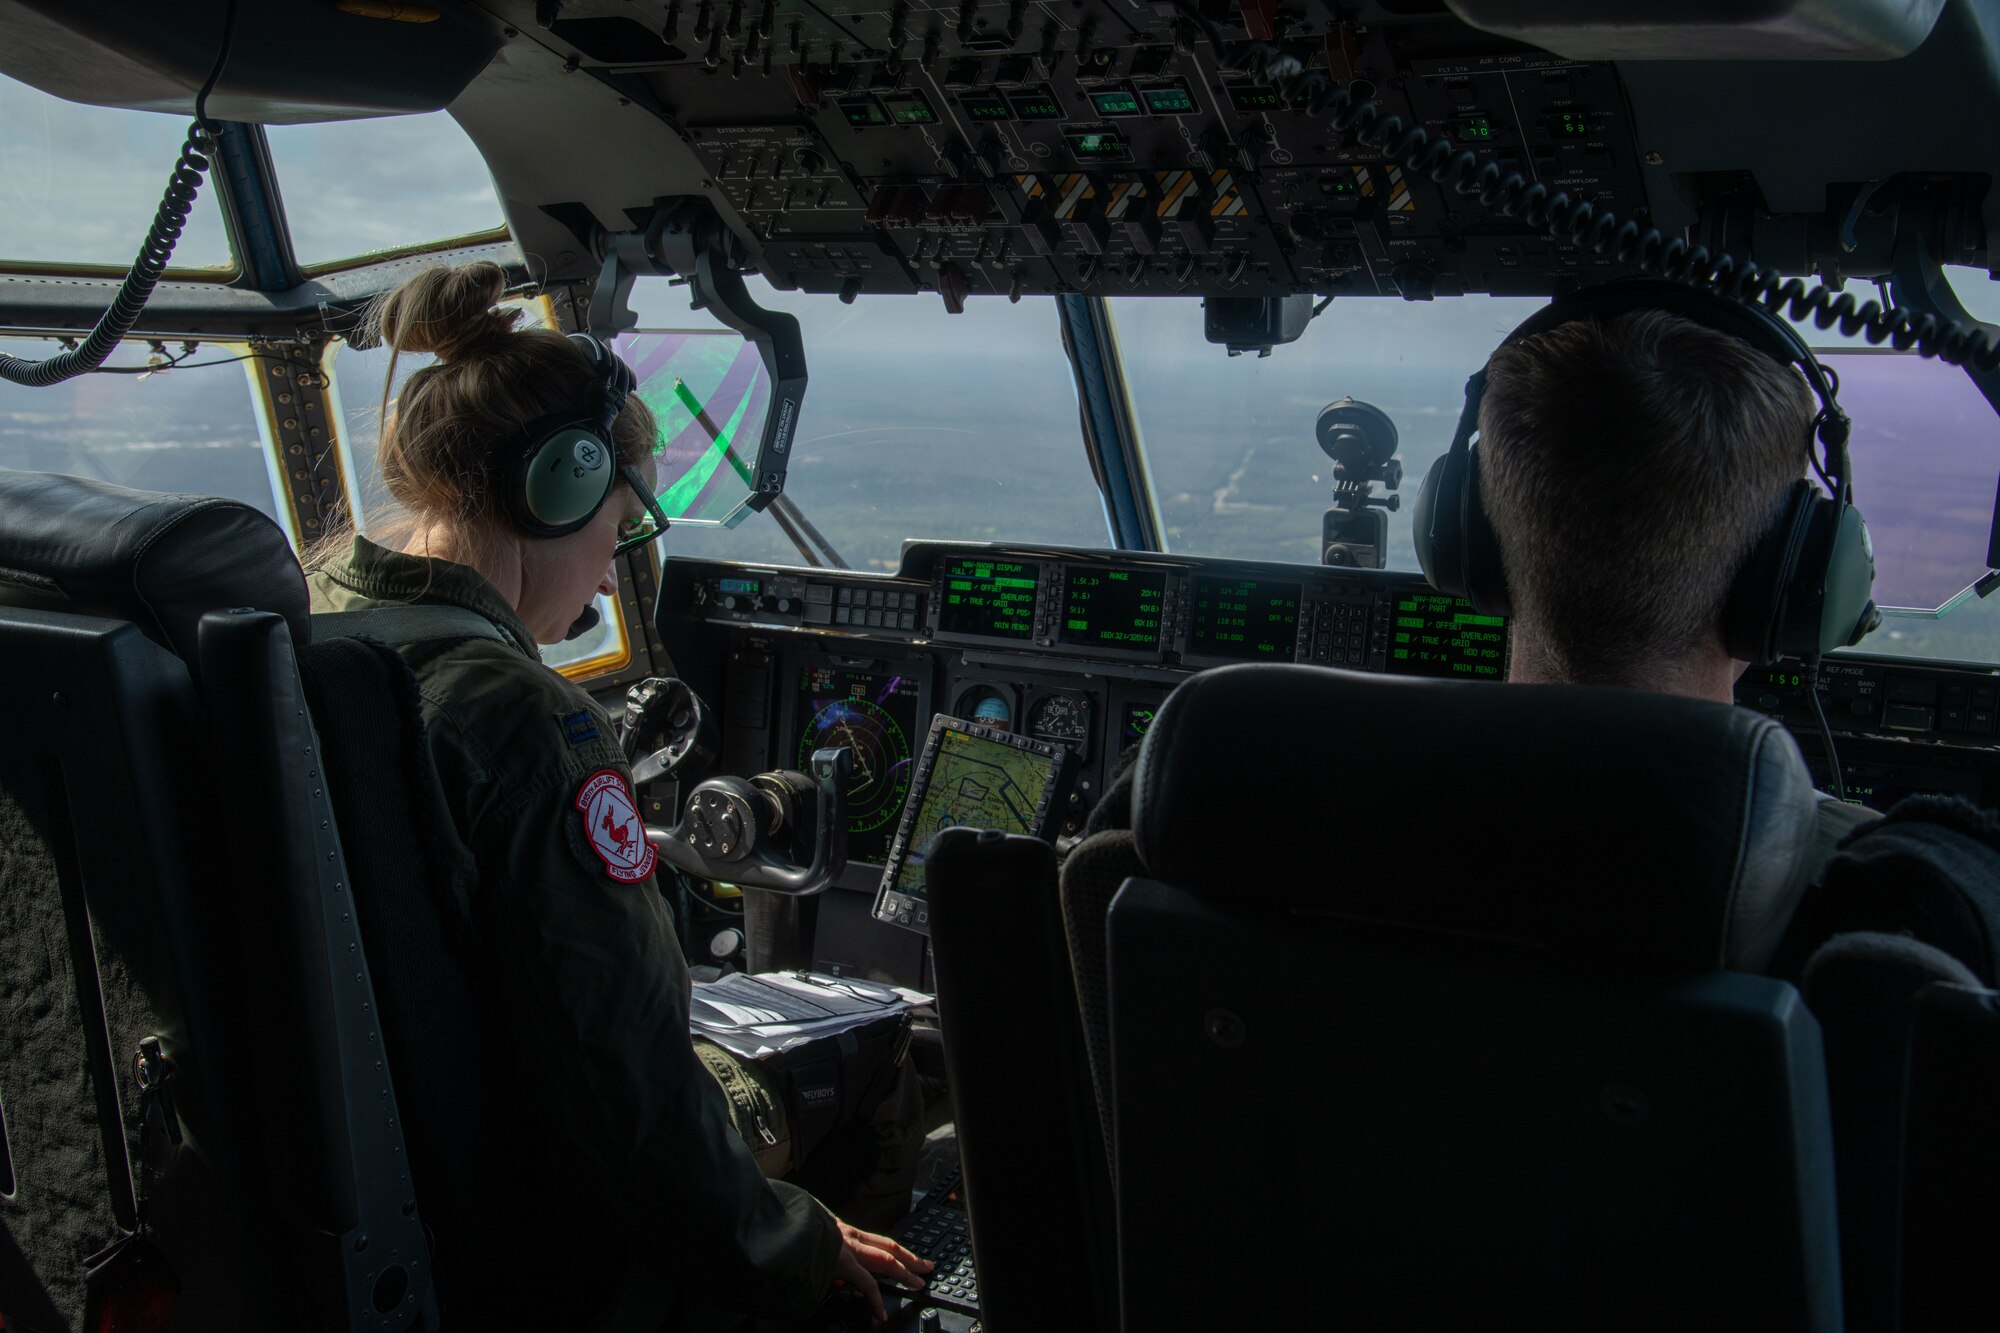 Capt. Leesa Froelich, aircraft commander, and Capt. Montgomery Sloat, co-pilot, both of the 815th Airlift Squadron “Flying Jennies” at Keesler Air Force Base, Miss., prepare to land at the Joint Readiness Training Center and Fort Polk, La., May 25, 2021. The 815th AS provided airlift and airdrop support during Voyager Shield, an exercise hosted by the 621st Air Mobility Advisory Group, May 25-27, while the Flying Jennies received required tactical training for pilots and loadmasters. (U.S. Air Force by Staff Sgt. Kristen Pittman)